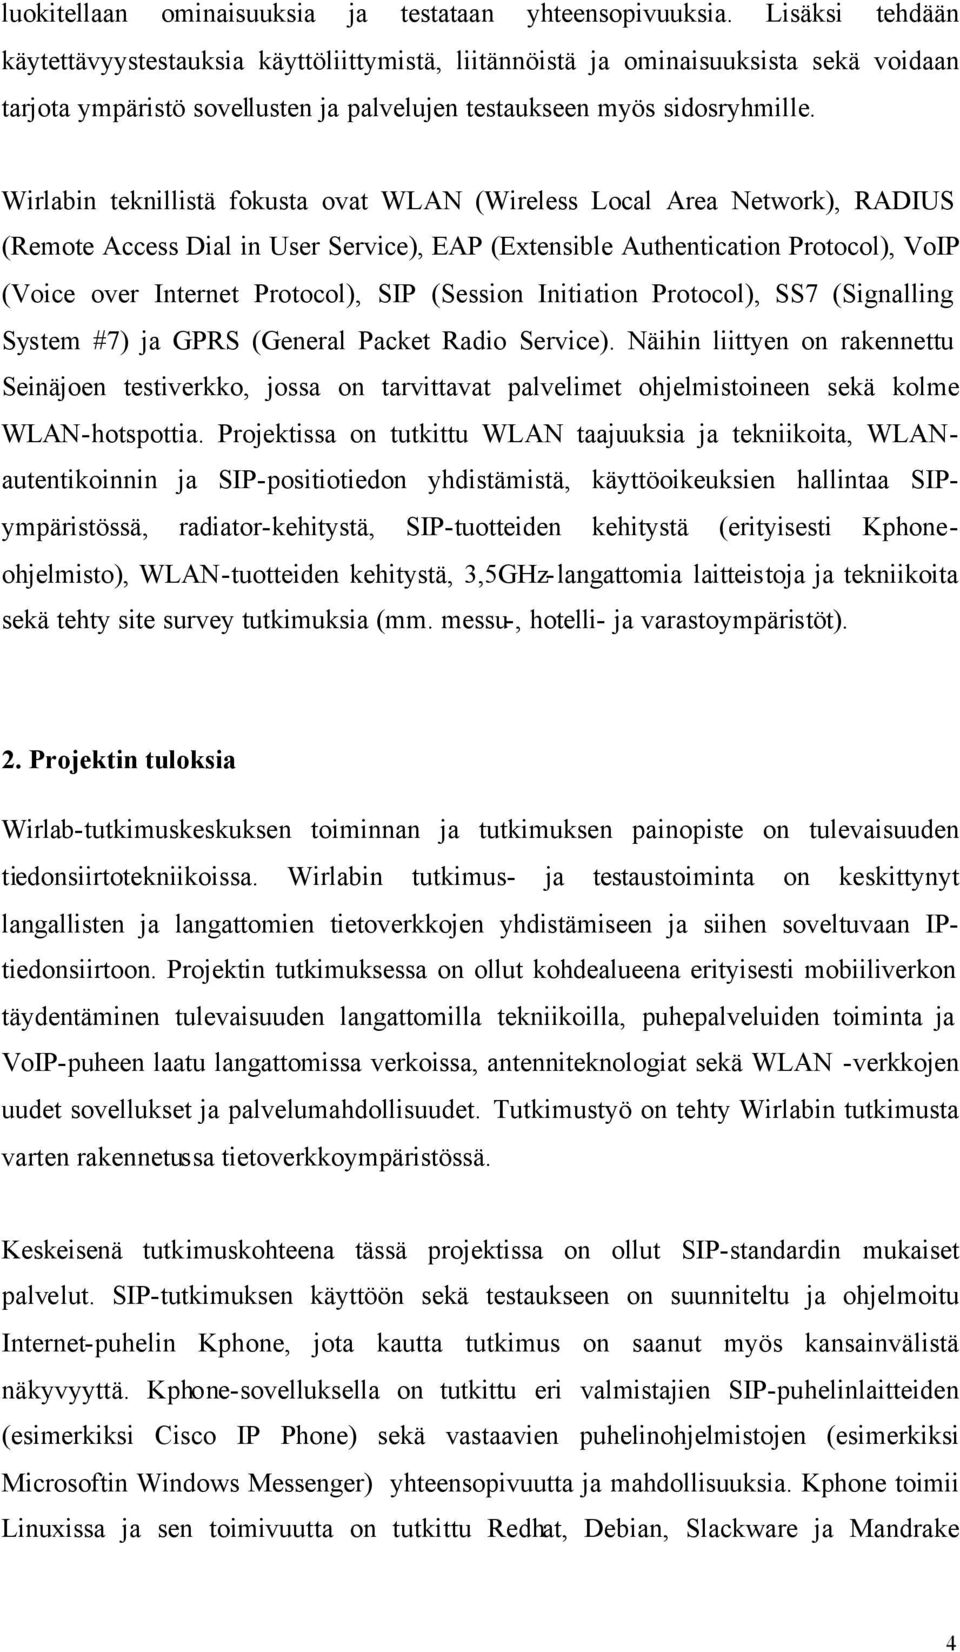 Wirlabin teknillistä fokusta ovat WLAN (Wireless Local Area Network), RADIUS (Remote Access Dial in User Service), EAP (Extensible Authentication Protocol), VoIP (Voice over Internet Protocol), SIP